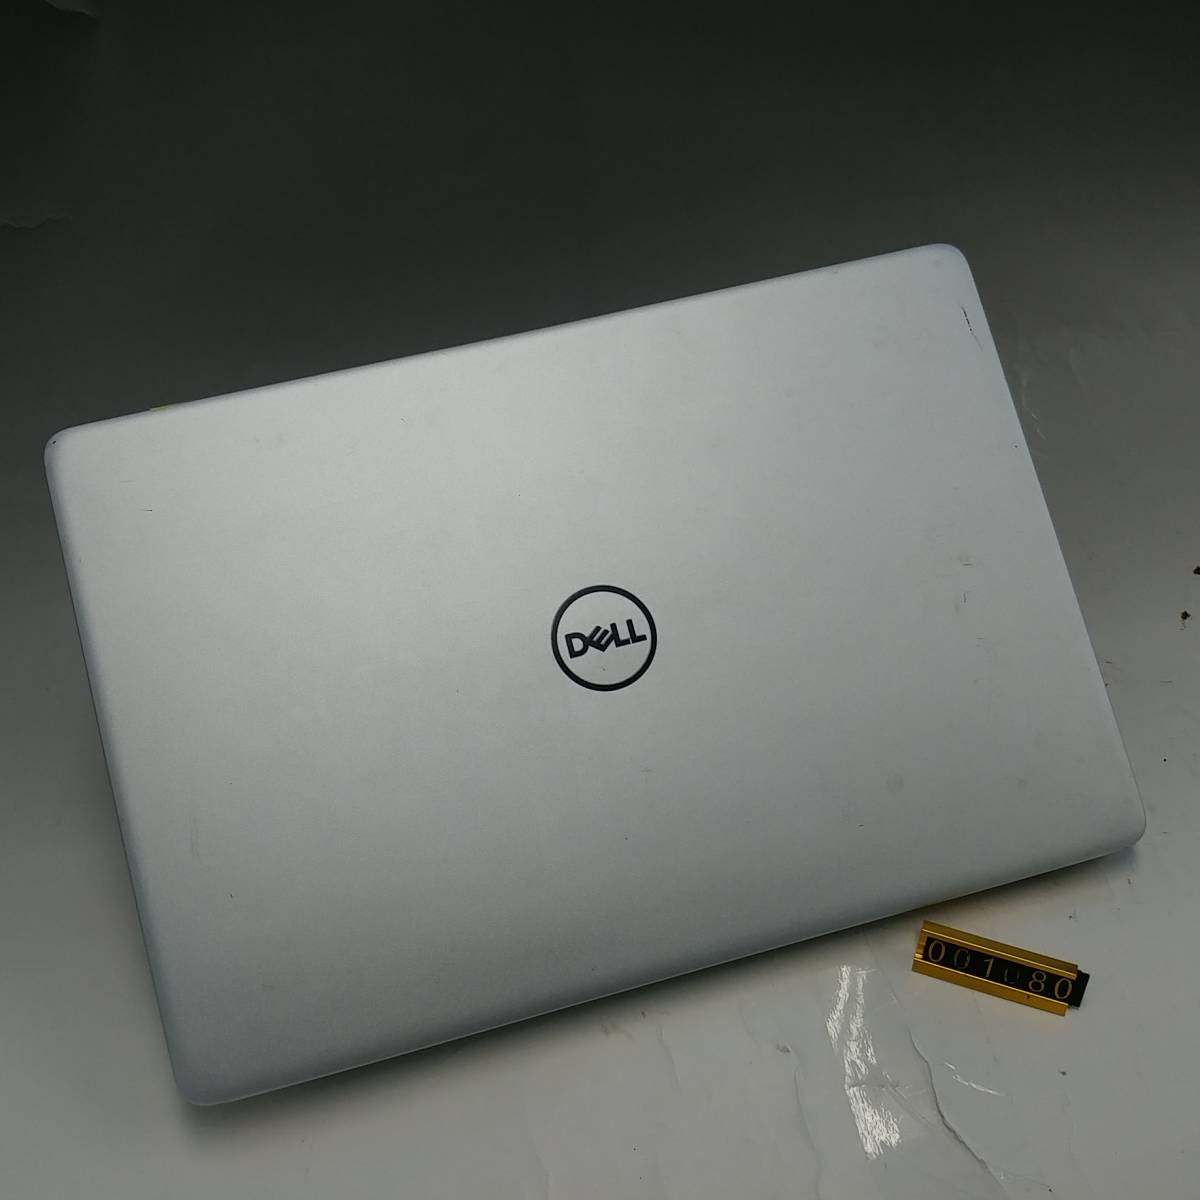 1080 DELL Inspiron5370 13.3 -inch Core i5 8250U 1.6Ghz no. 8 generation memory 16GB SSD less battery less 